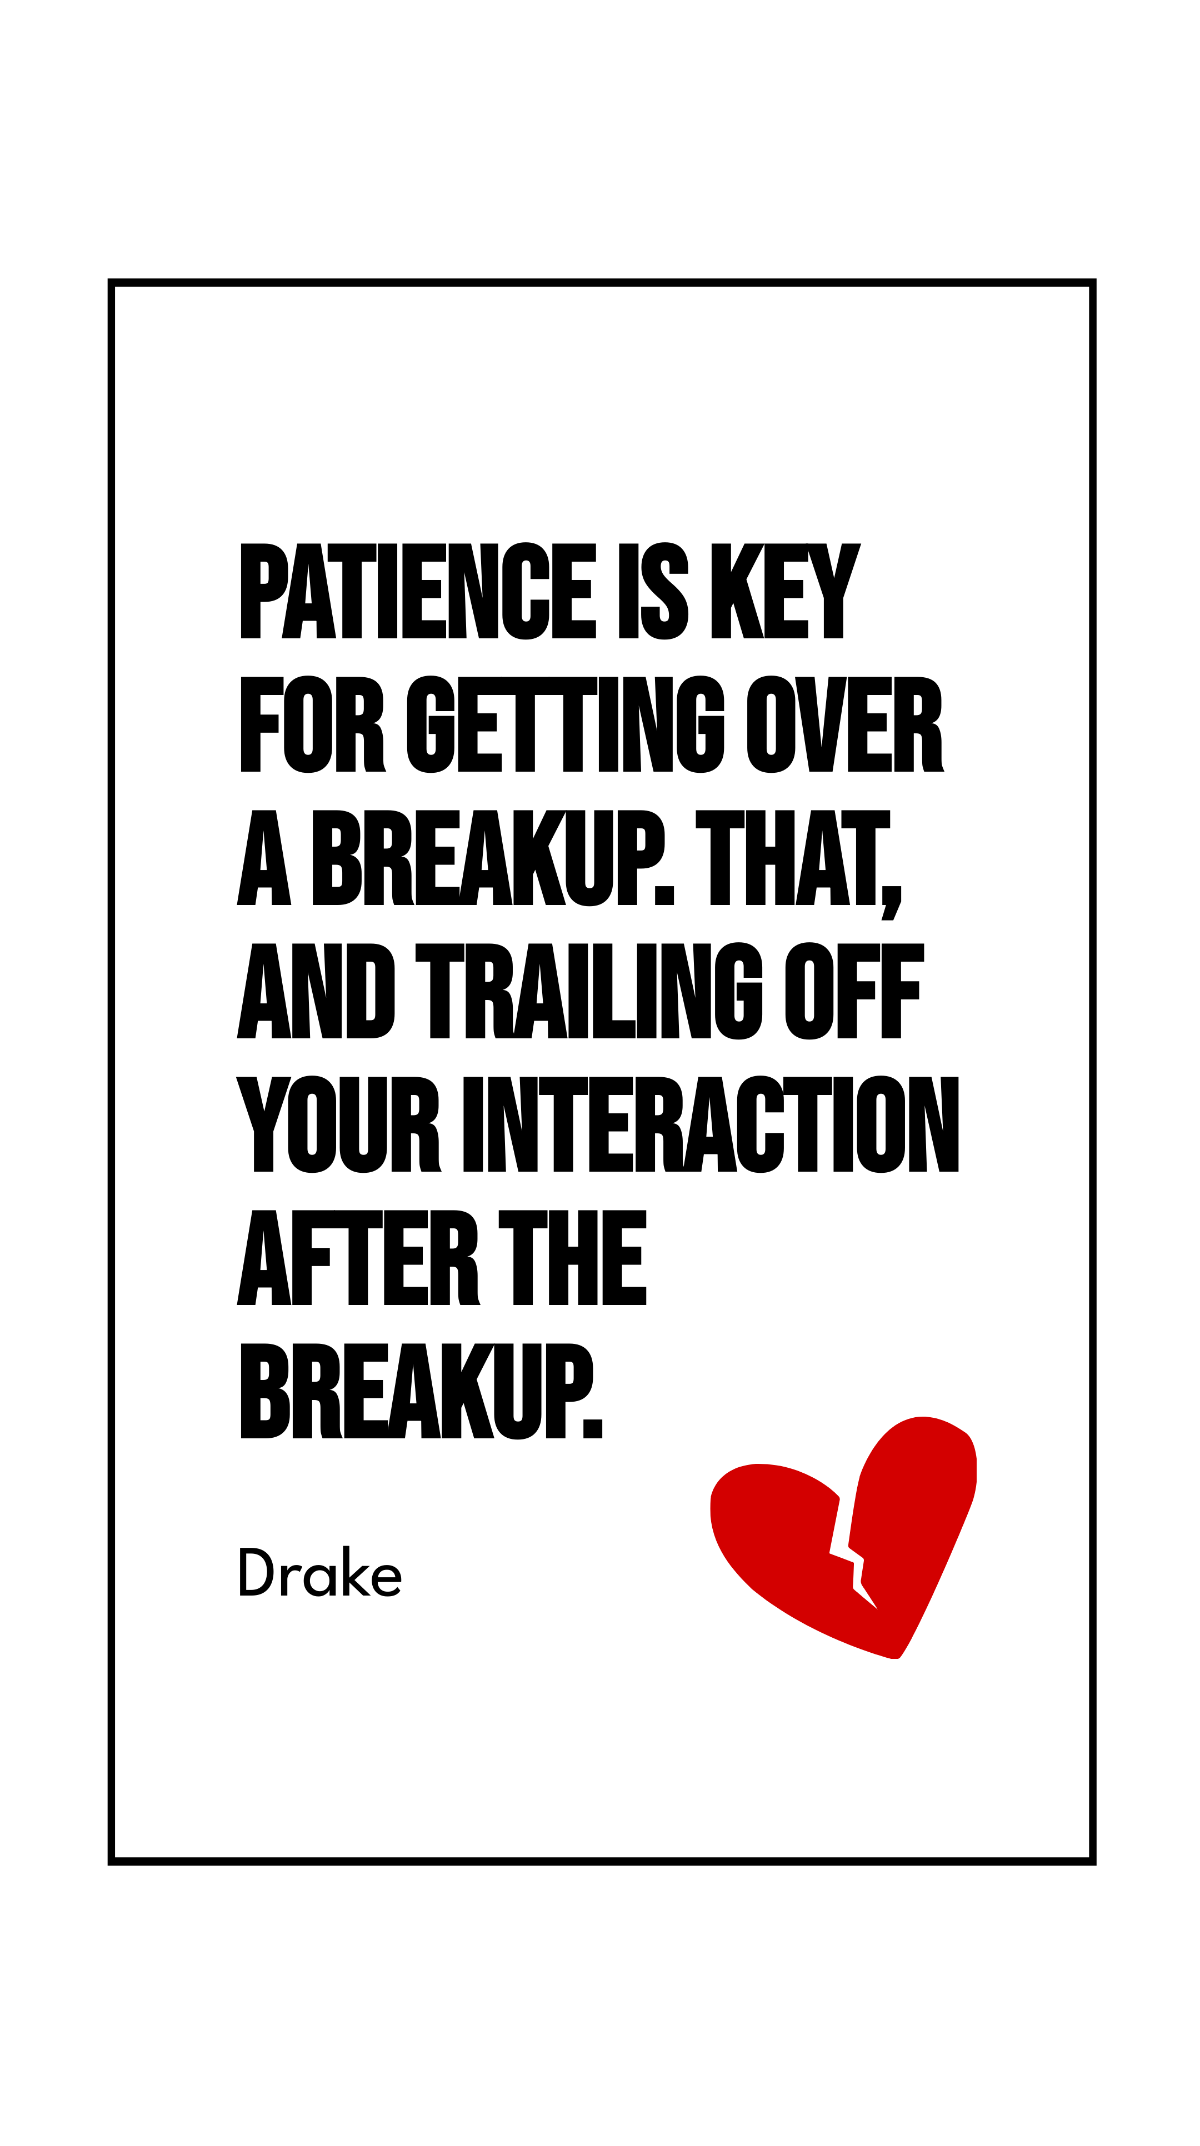 Free Drake - Patience is key for getting over a breakup. That, and trailing off your interaction after the breakup. Template